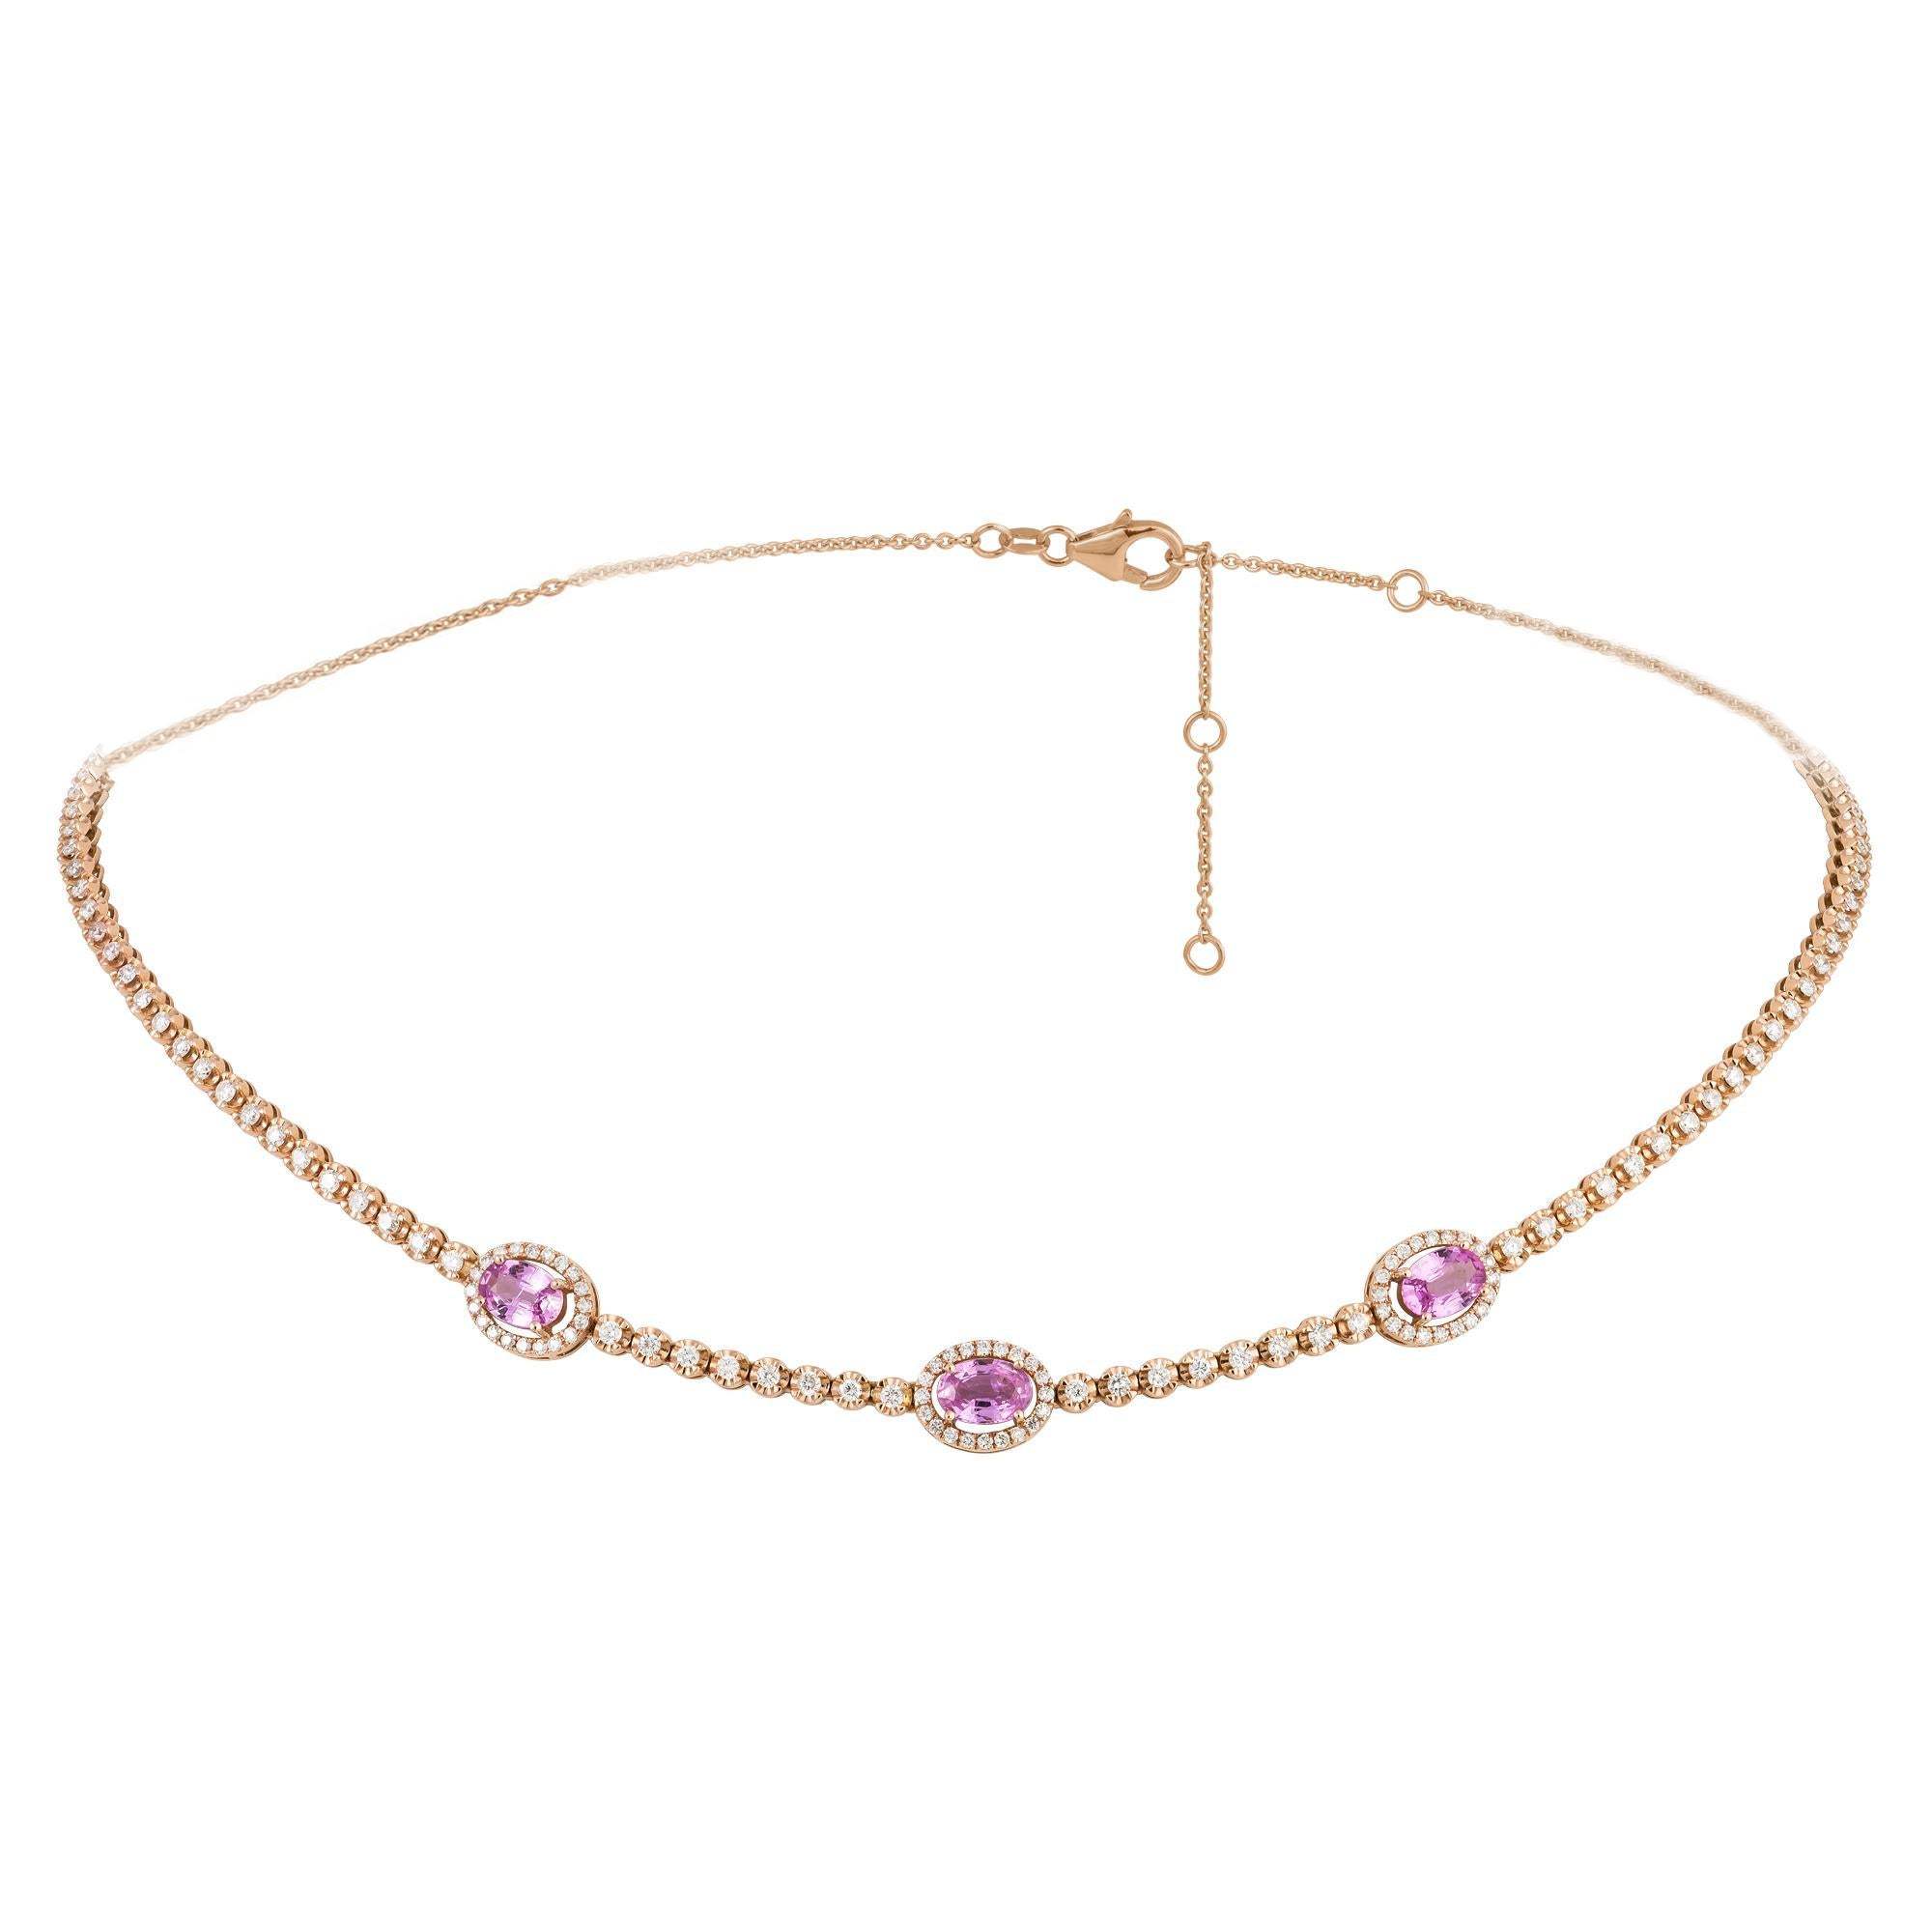 Modern Pink Gold 18K Necklace Pink Sapphire Diamond for Her